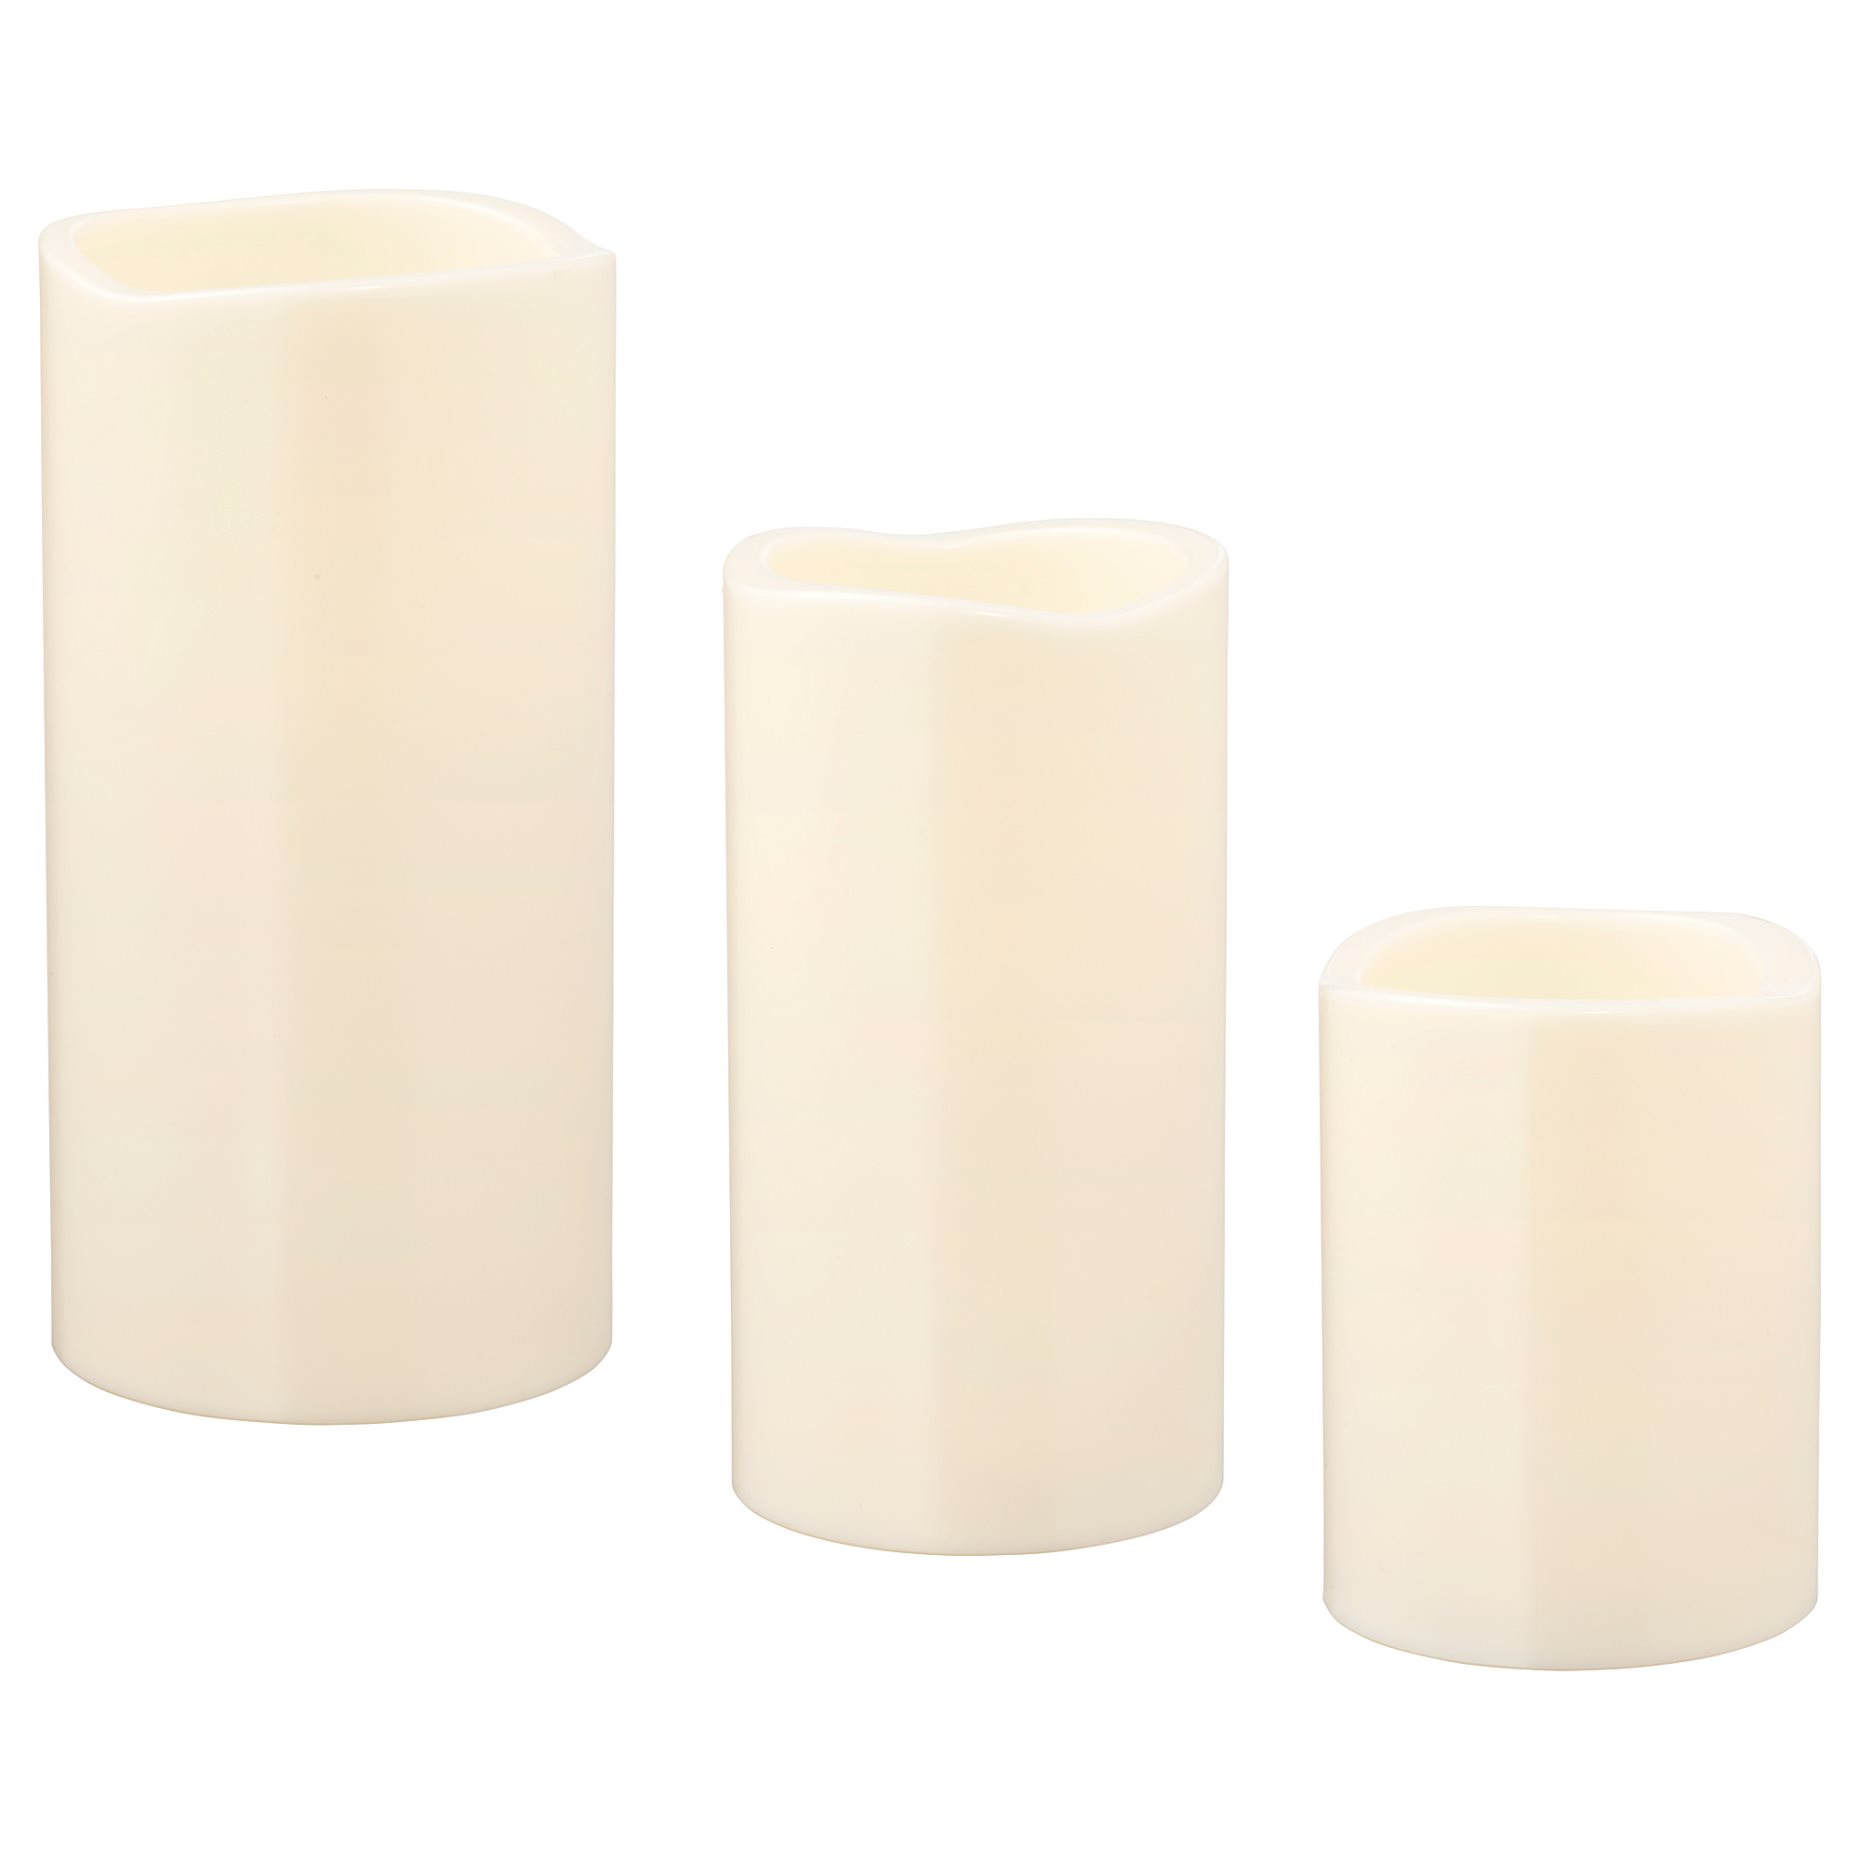 GODAFTON, LED block candle in/out, set of 3, 503.555.74